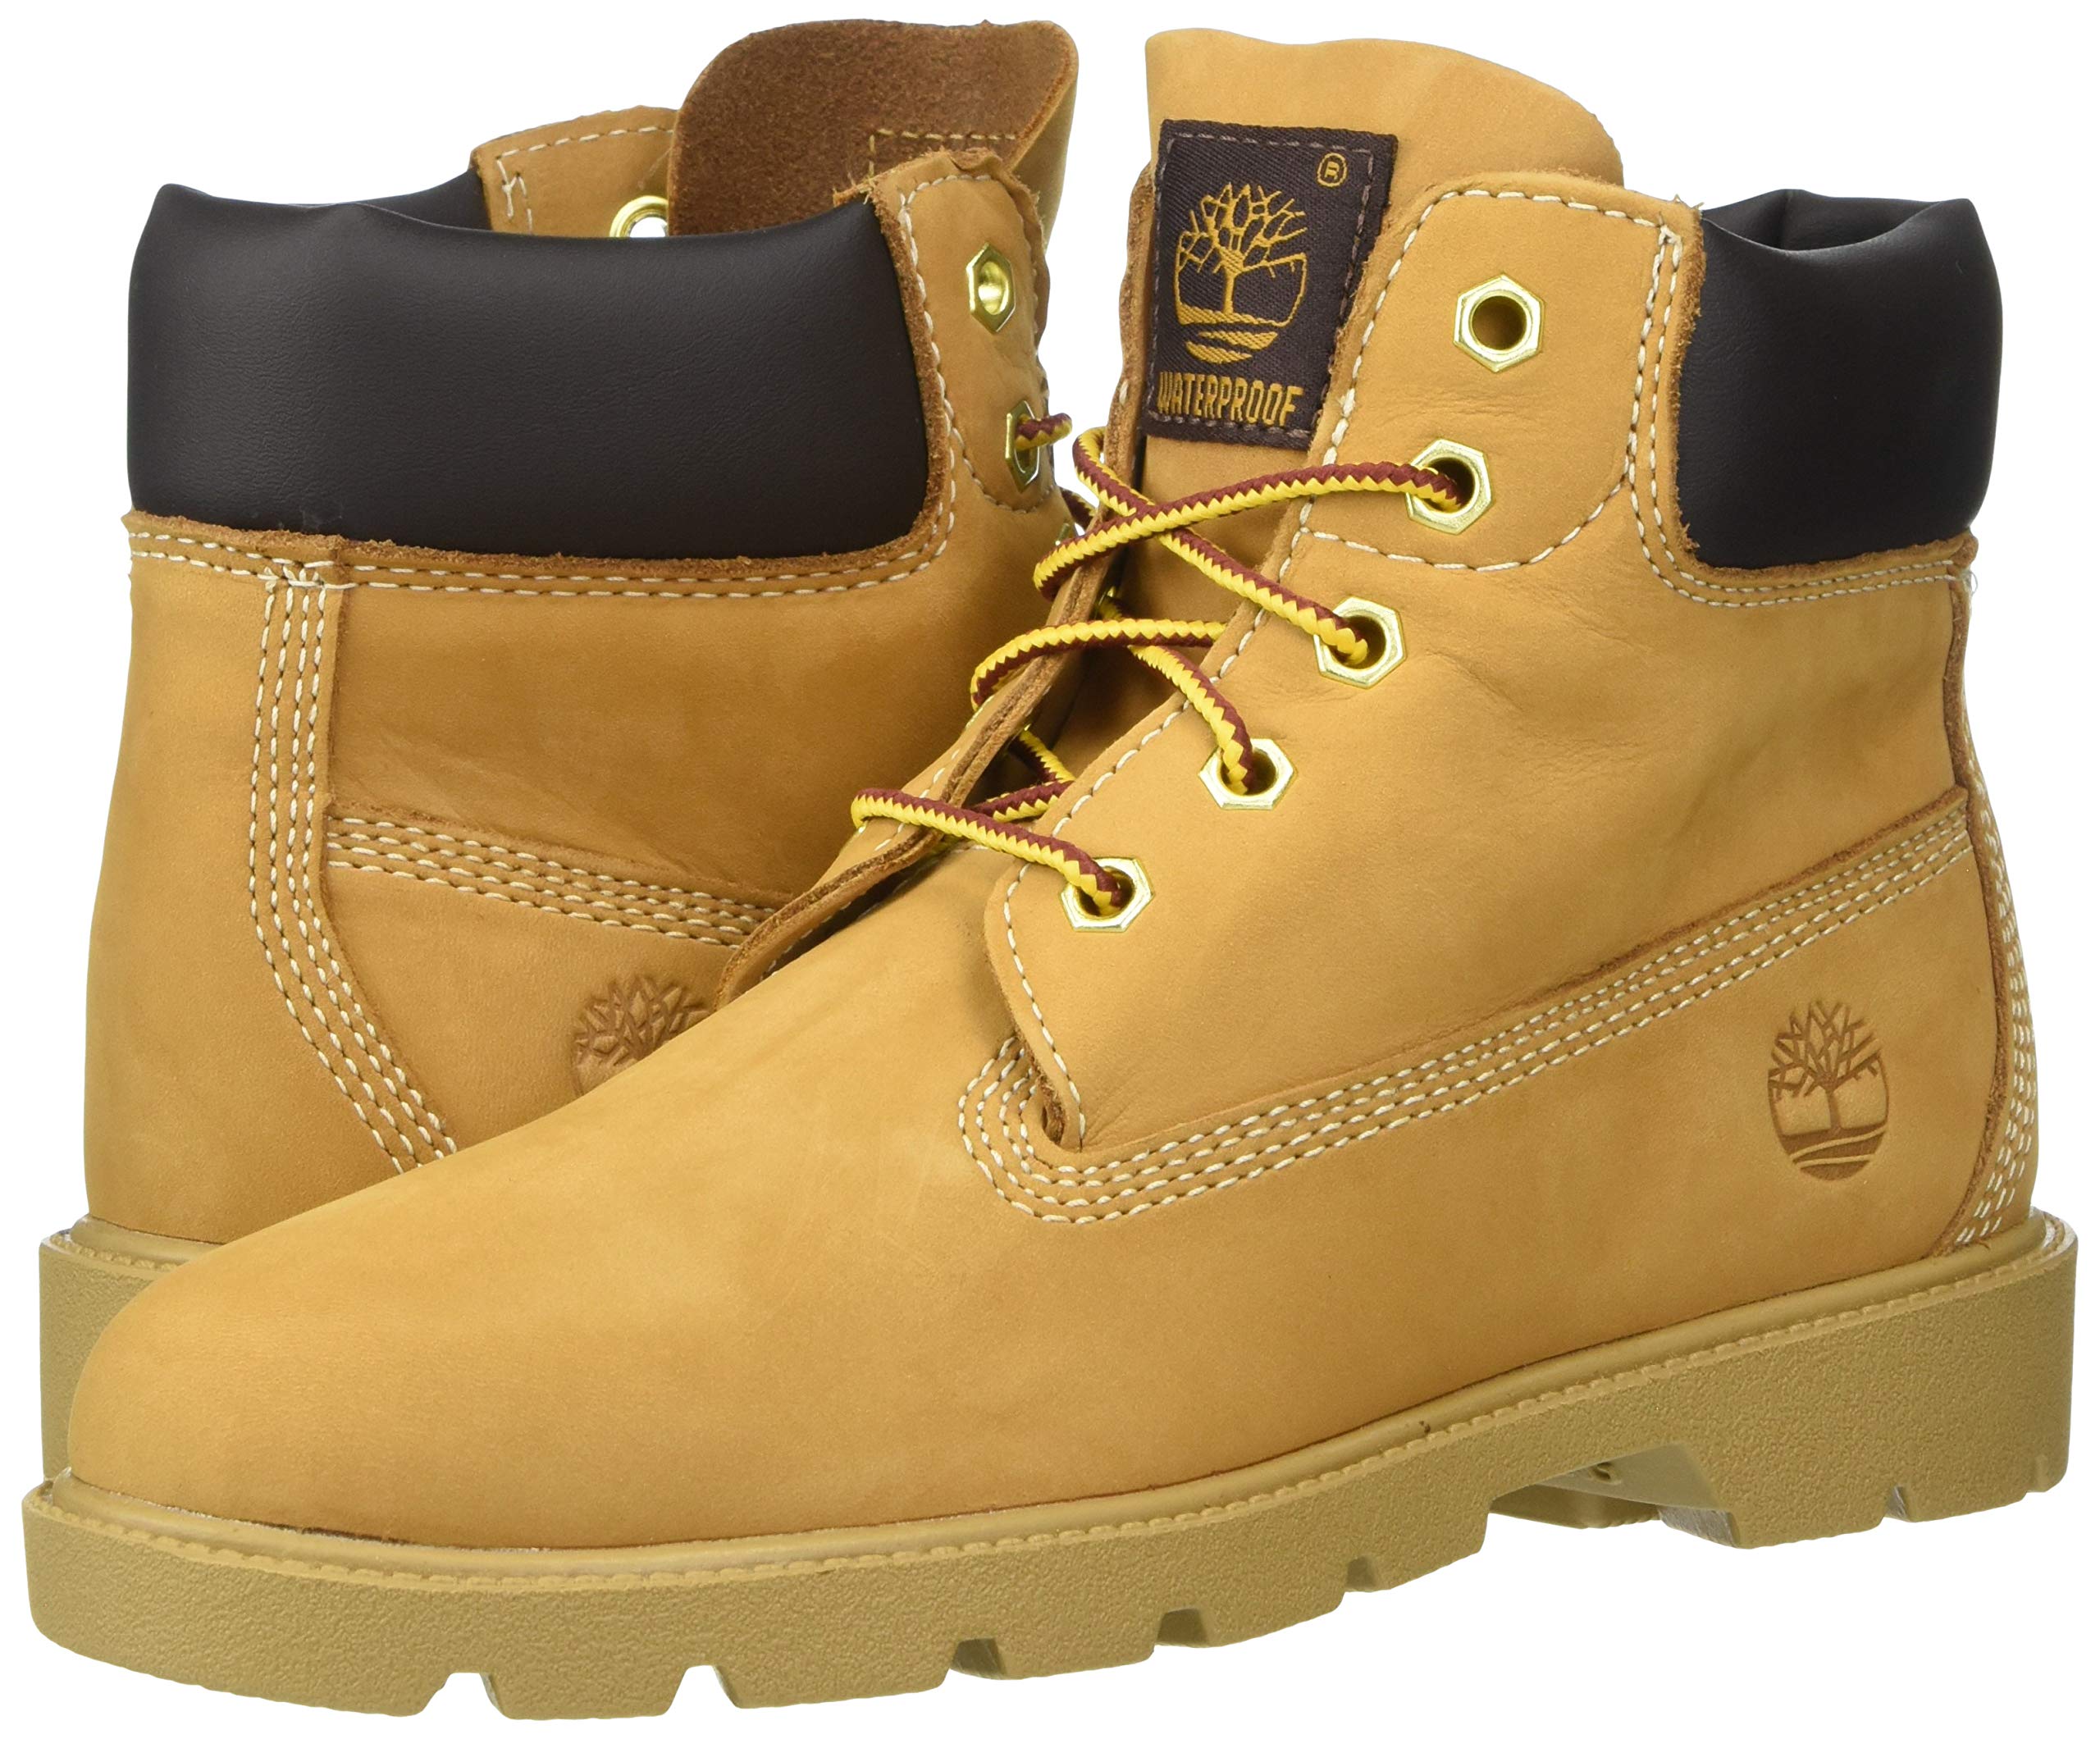 Timberland Unisex-Child Children's Classic 6-inch Waterproof Ankle Boot